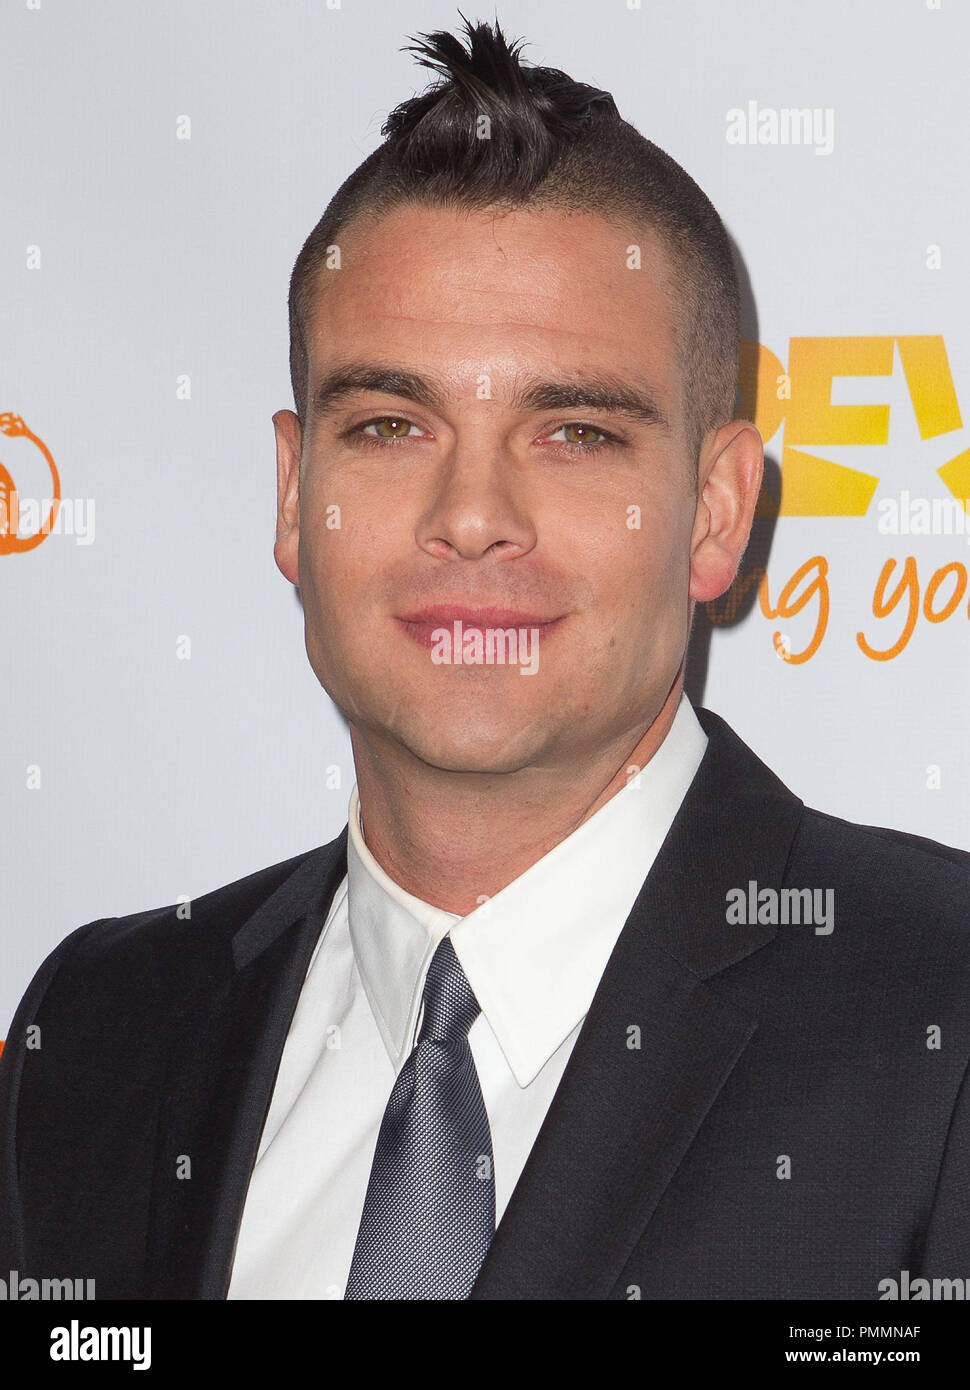 Mark Salling at The Trevor Project's 2011 Trevor Live! held at The Hollywood Palladium in Hollywood, CA. The event took place on Sunday, December 4, 2011. Photo by Eden Ari/ PRPP/ PictureLux Stock Photo